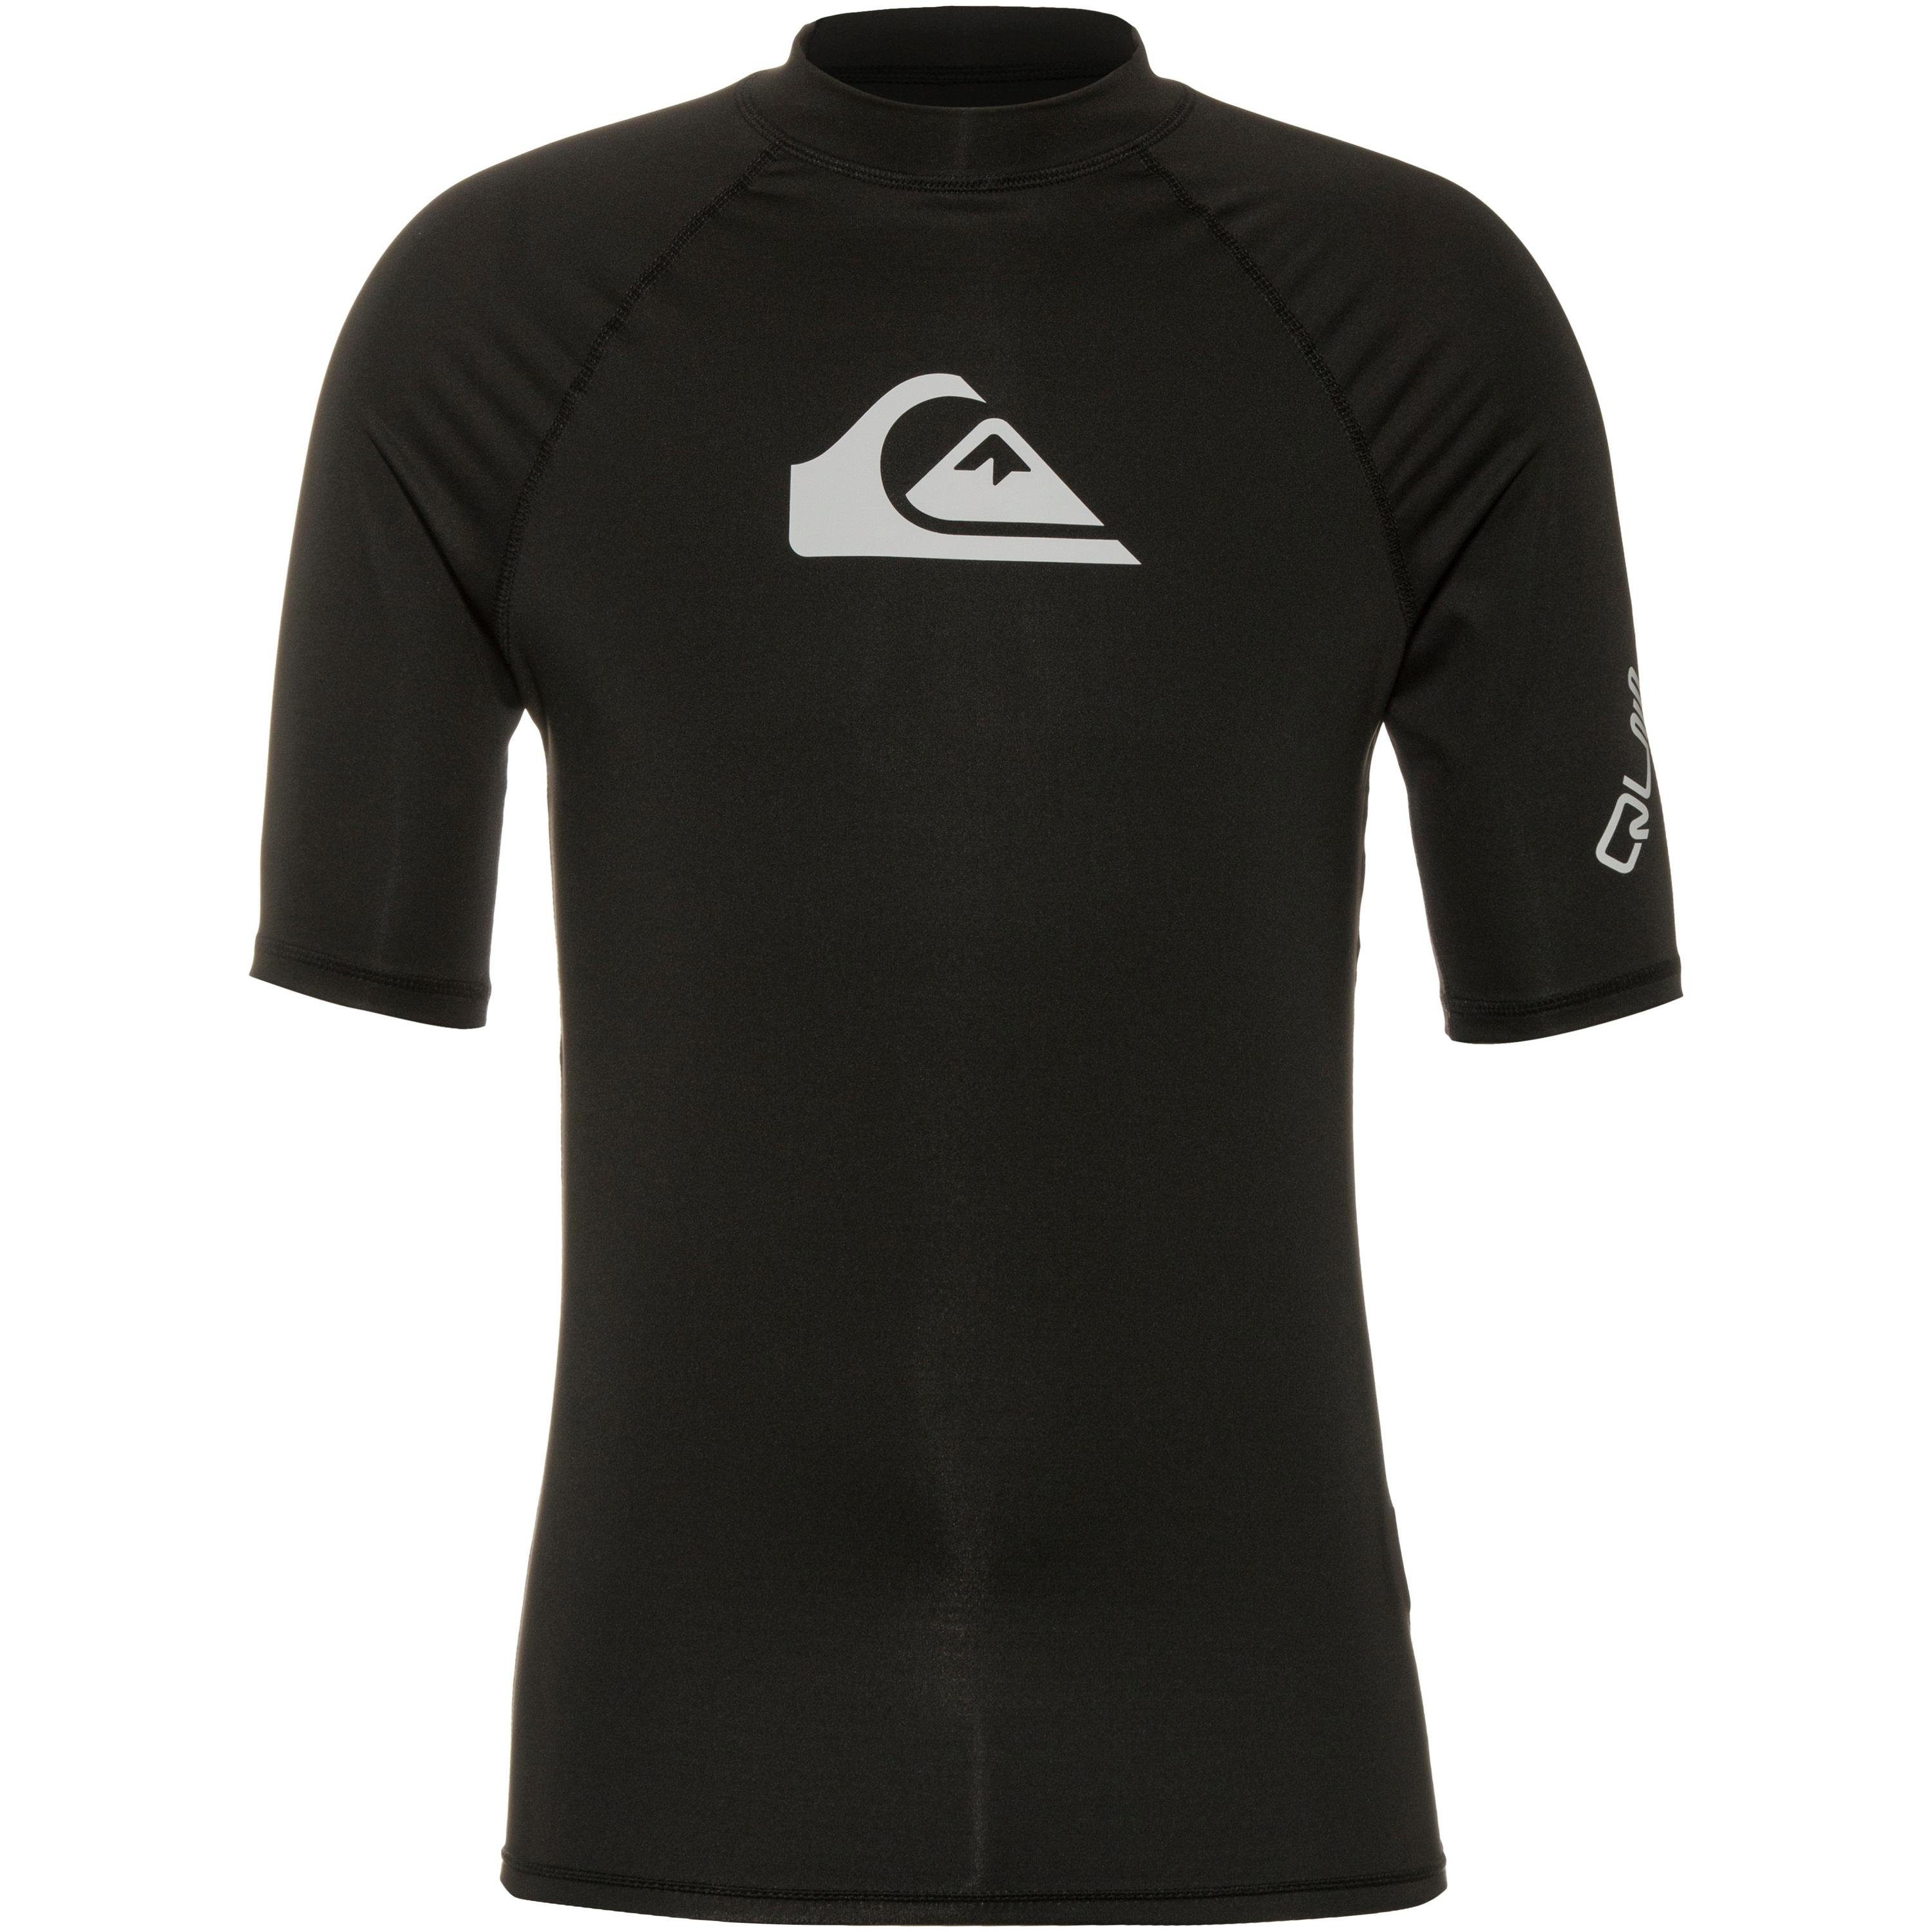 Quiksilver T-Shirt ALL black TIME